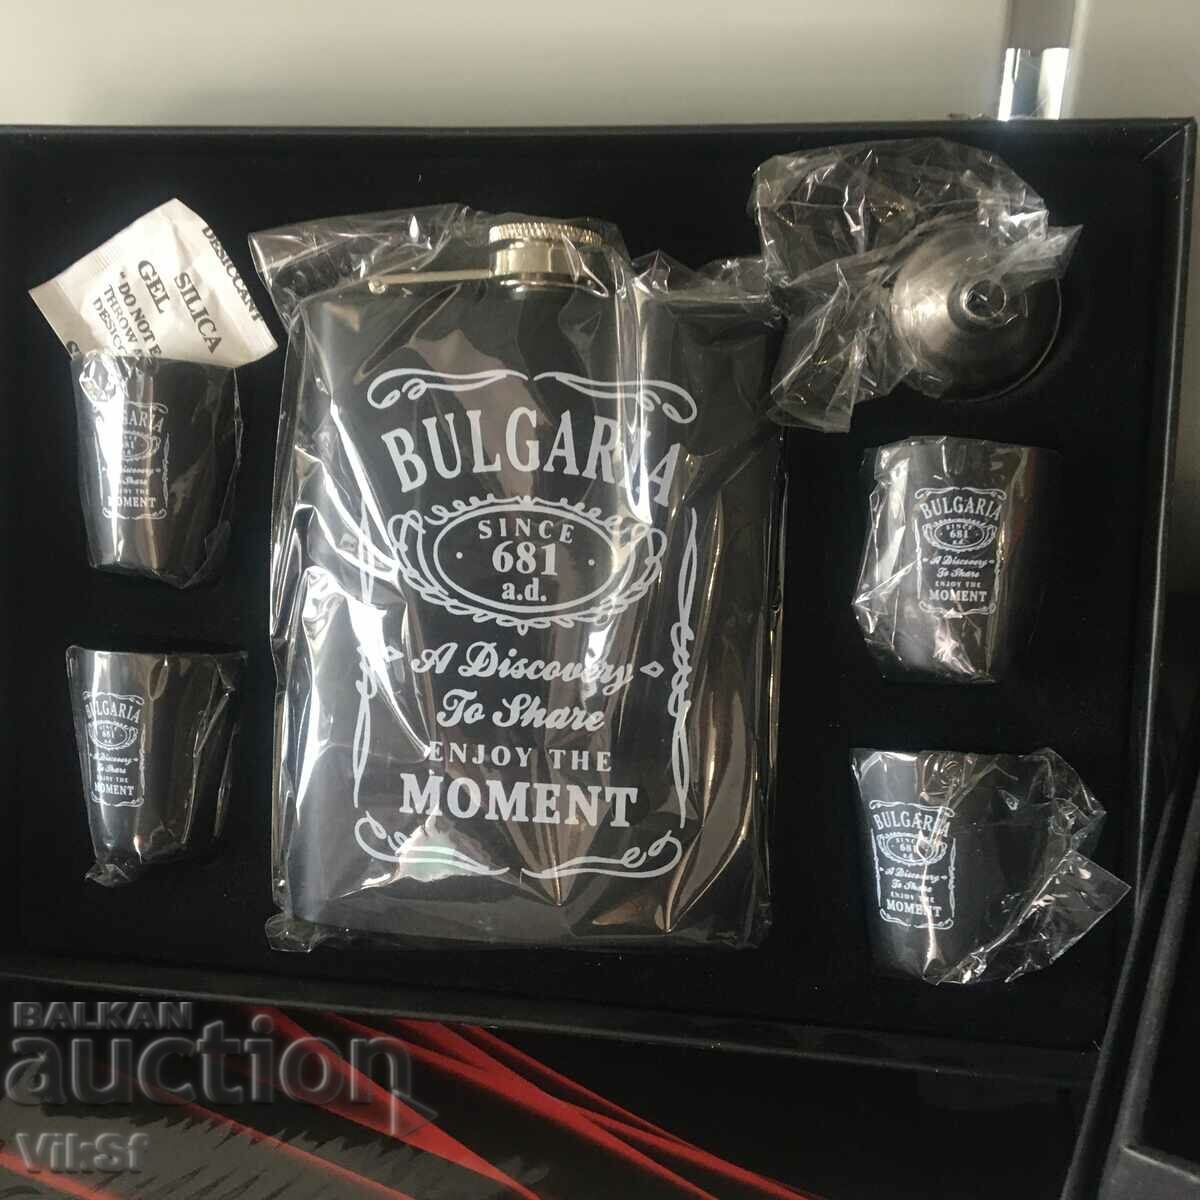 Gift set - alcohol jug with 4 shots and funnel